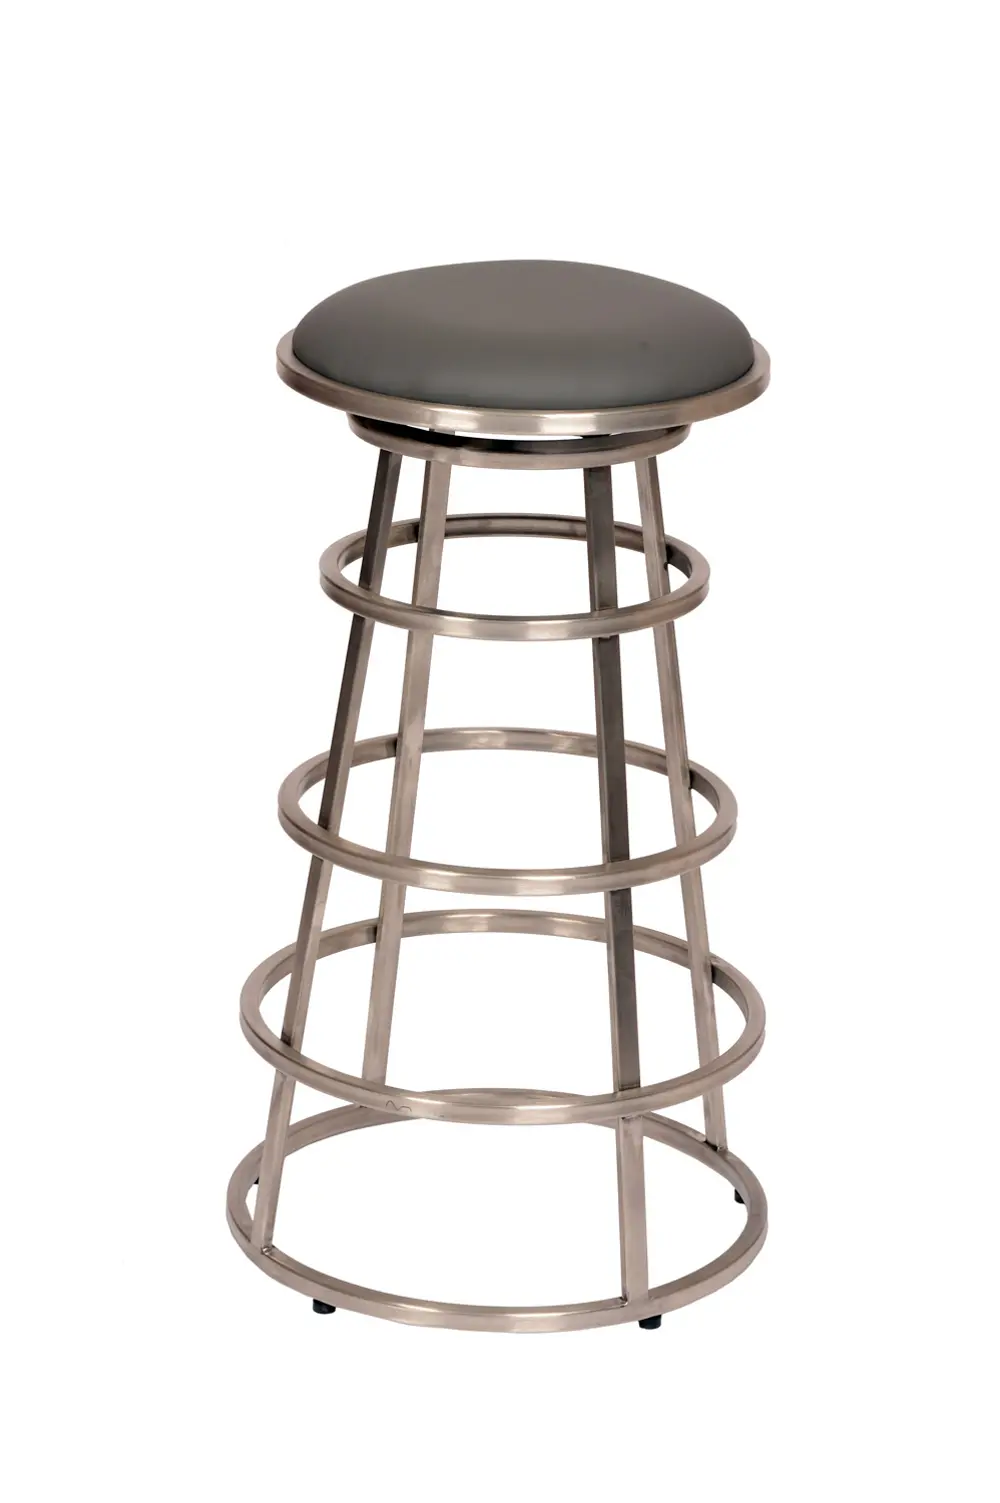 LCRISW30BAGRB201 Gray Backless Counter Height Stool - Ringo -1